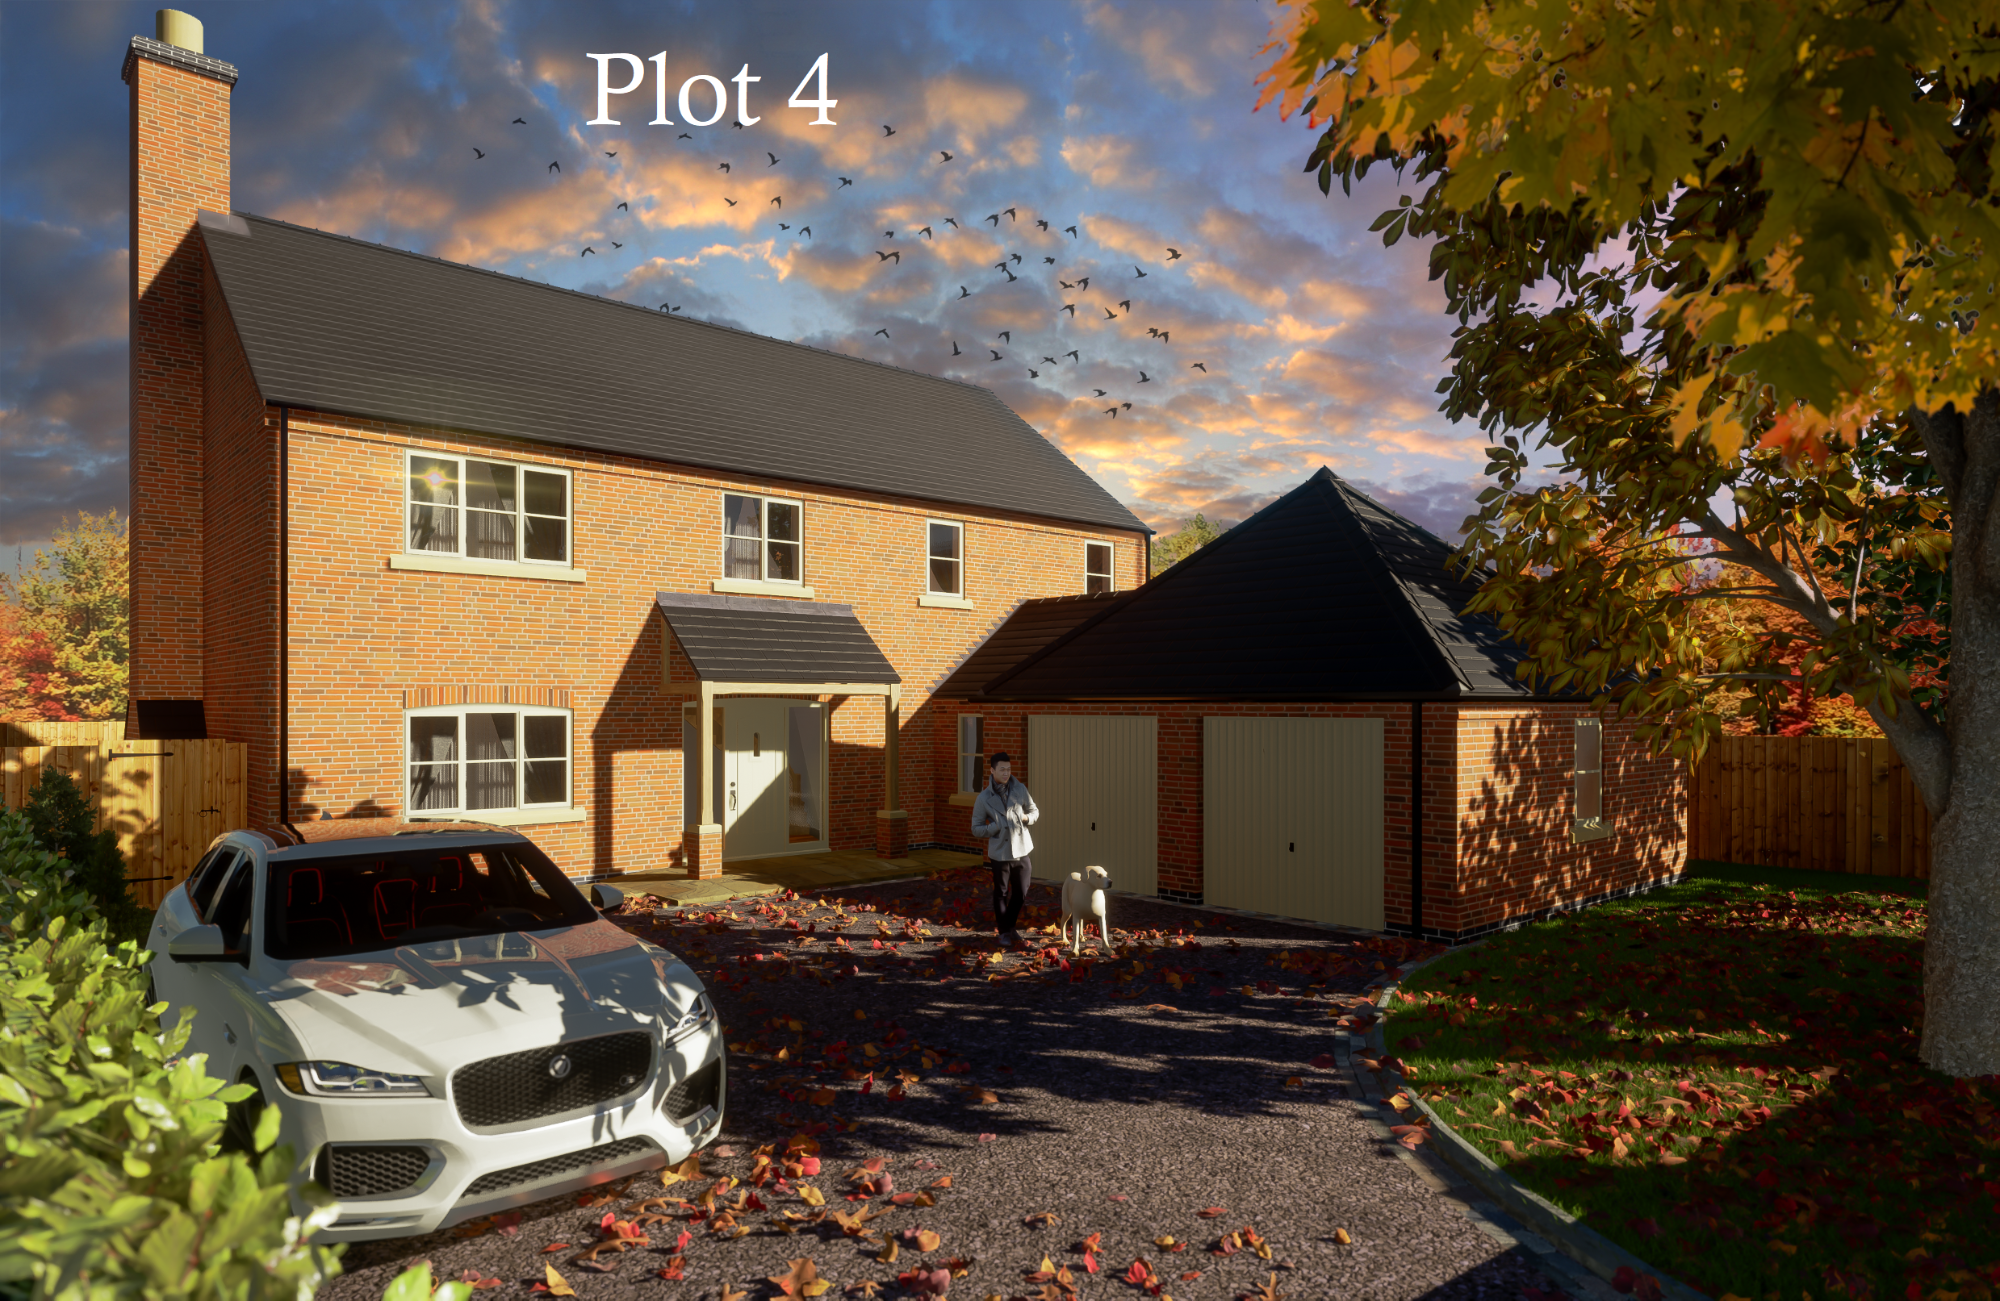 Plot 4 White House Farm - Plots with full planning permission in Lincolnshire